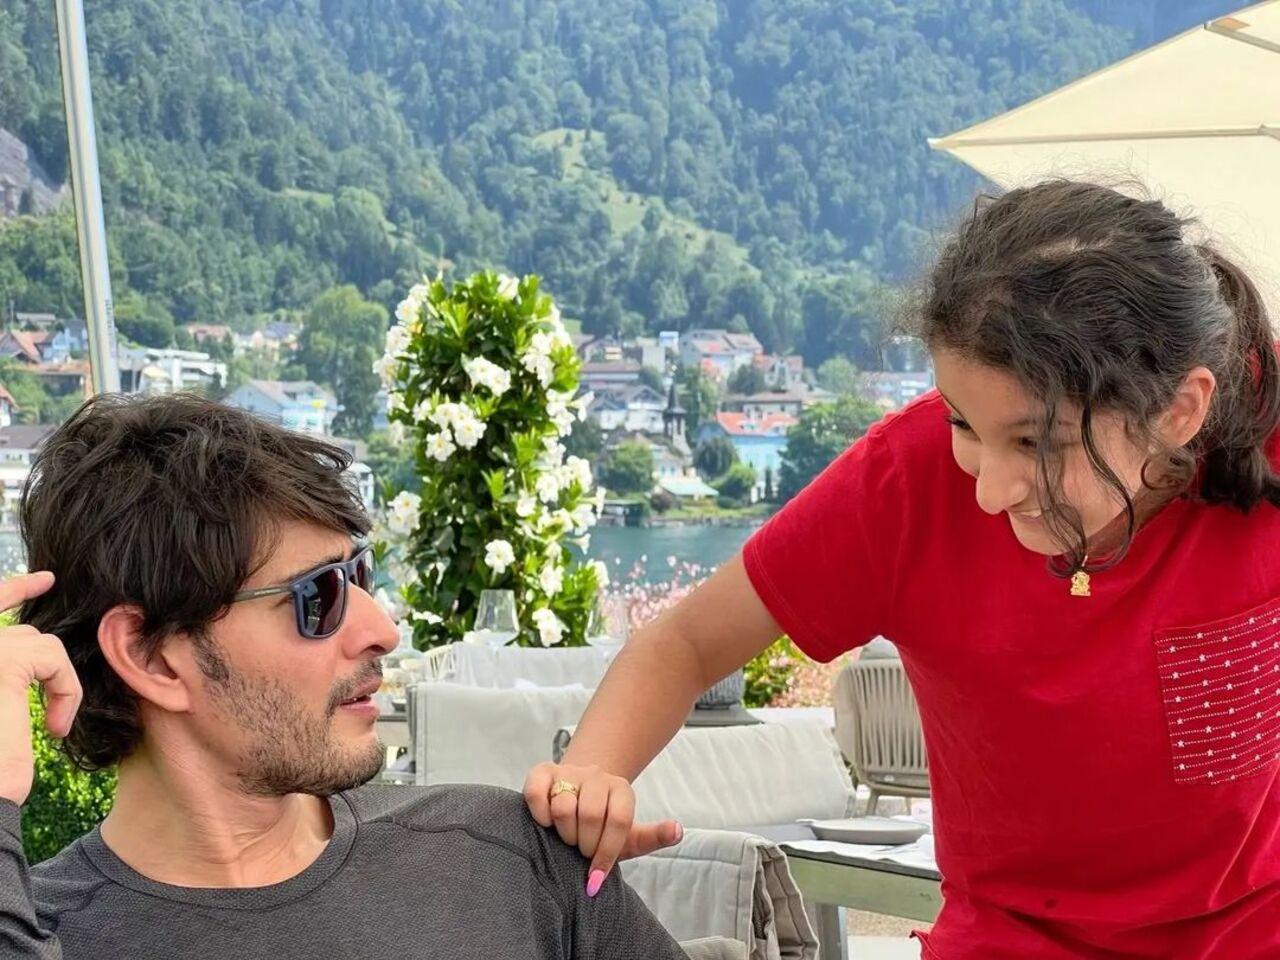 Sitara Ghattamaneni 
Sitara Ghattamaneni is Mahesh Babu and Namrata Shirodkar's daughter. She is popular on social media. Recently, Sitara, who is 11 years old, made her acting debut for a jewellery brand's commercial
 